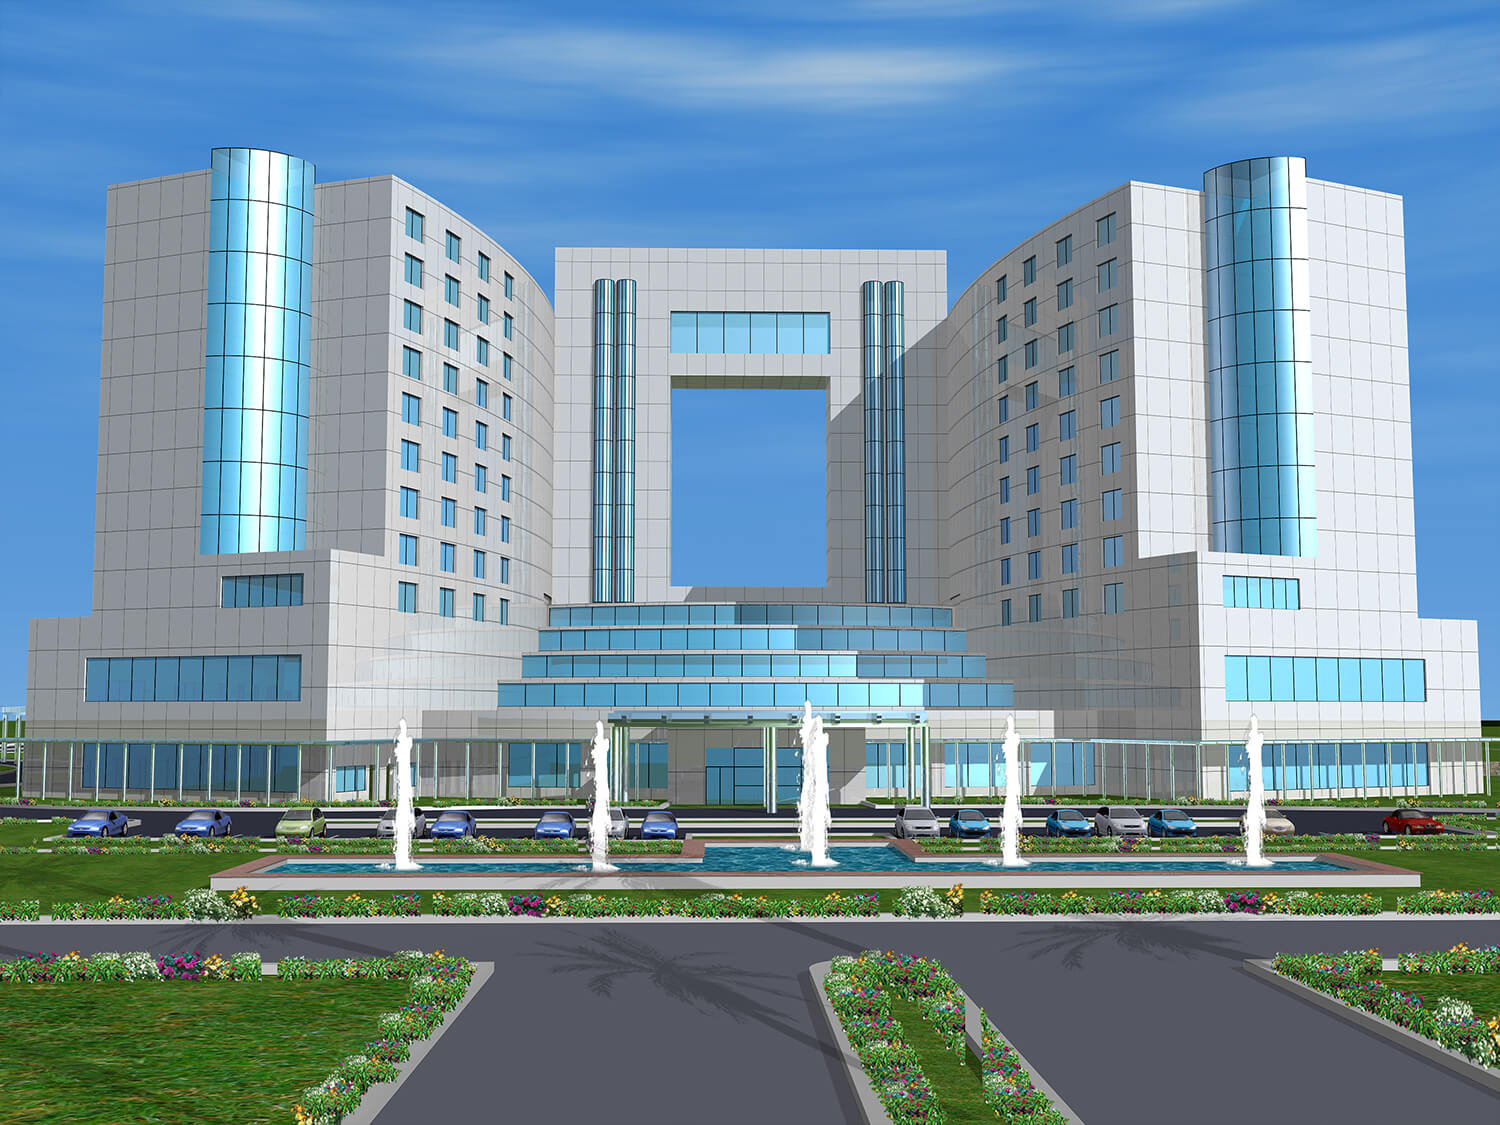 Proposed Hotel2 